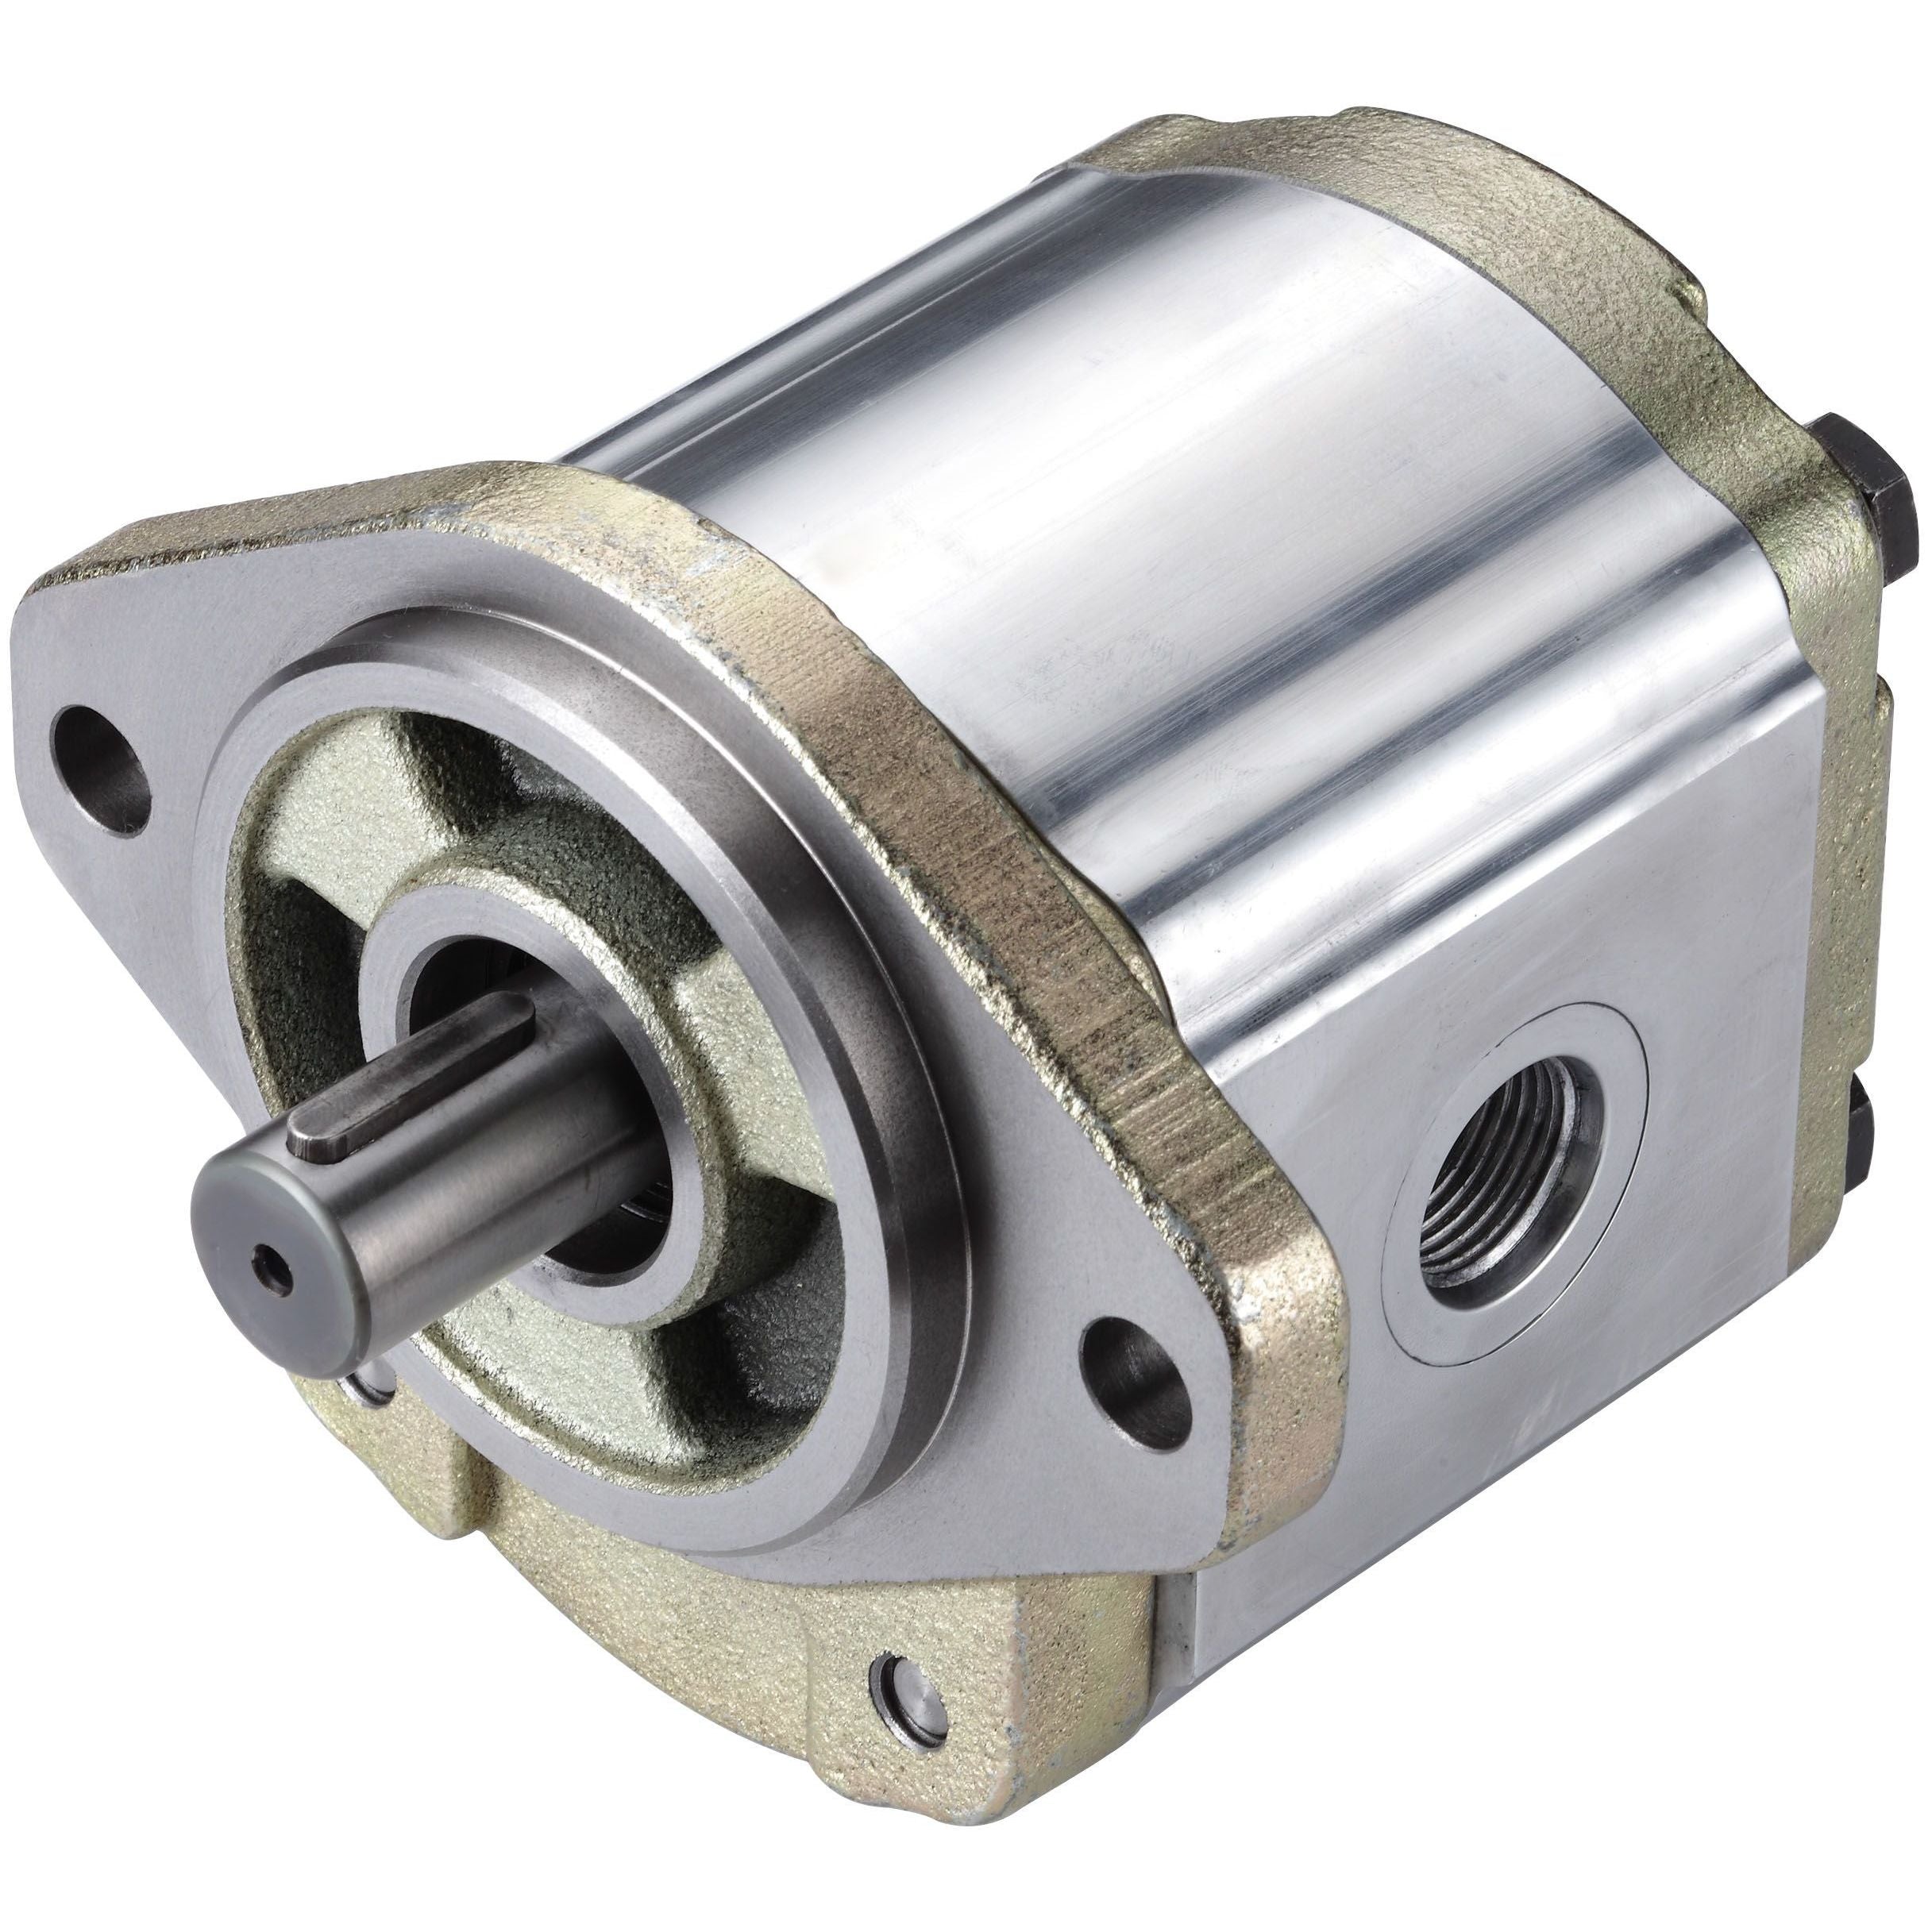 3GB8U138L : Honor Gear Pump, CCW Rotation, 38cc (2.32in3), 18.07 GPM, 3500psi, 3000 RPM, #16 SAE (1") In, #16 SAE (1") Out, Splined Shaft 13-Tooth, 16/32 Pitch, SAE B 2-Bolt Mount